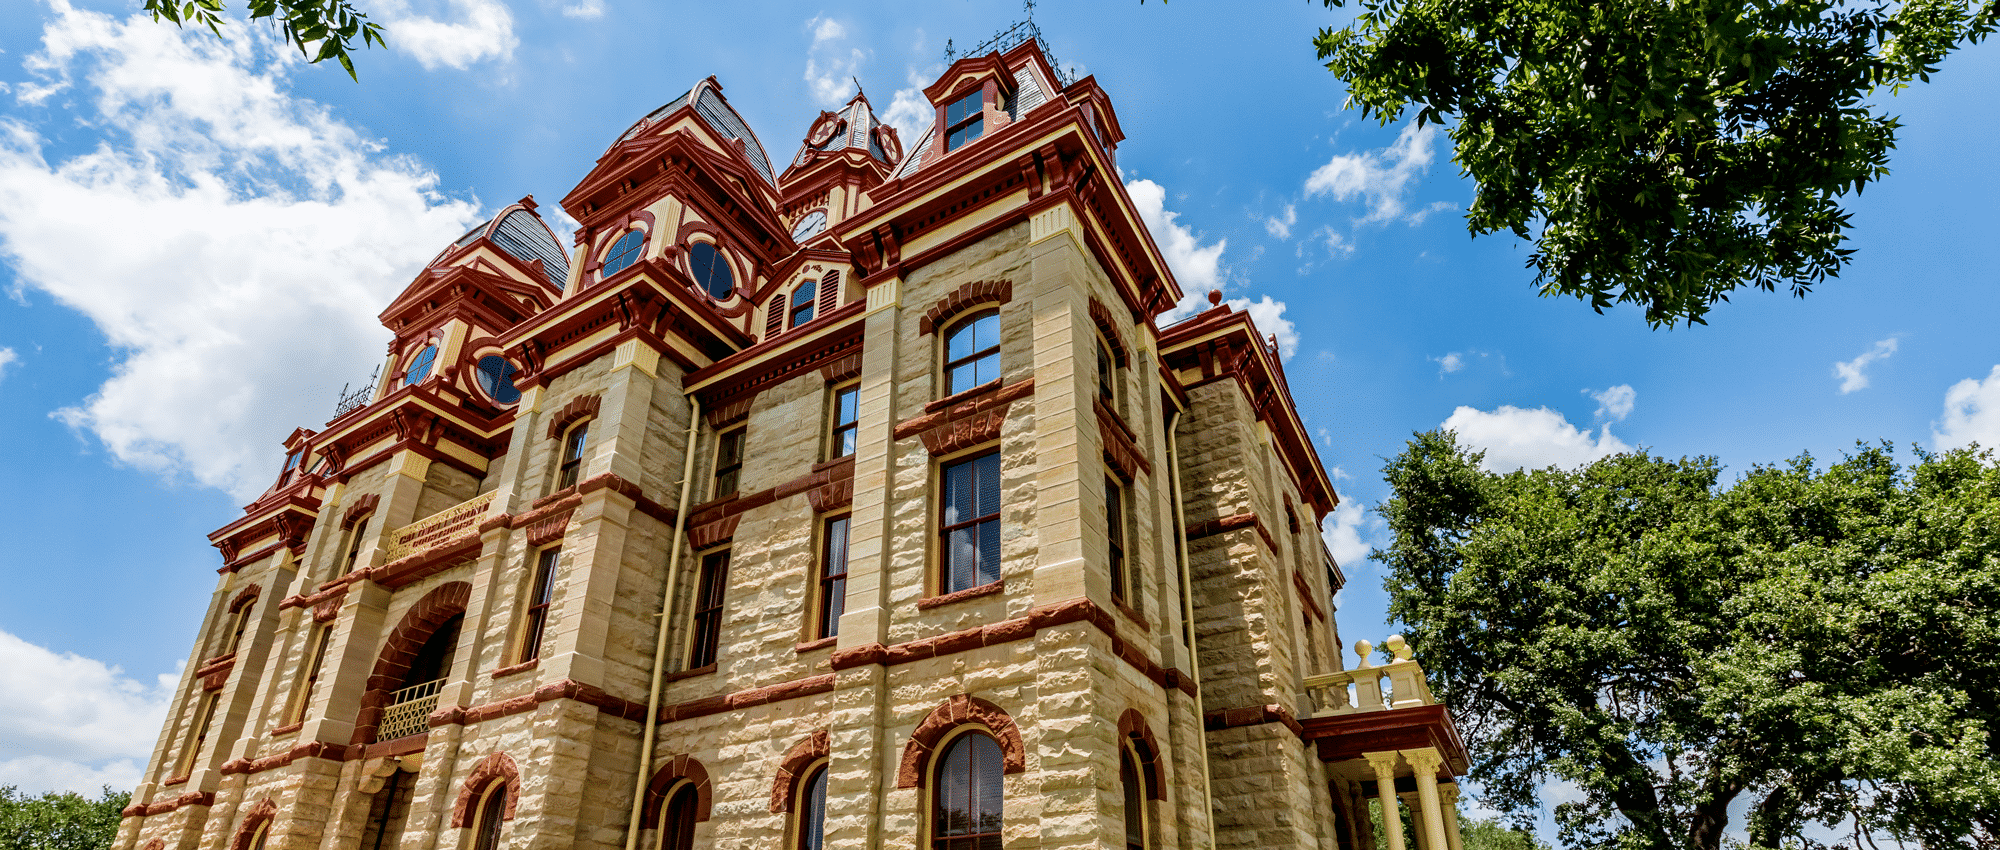 Your Guide to Lockhart: A Flourishing Town Between Austin and San Antonio